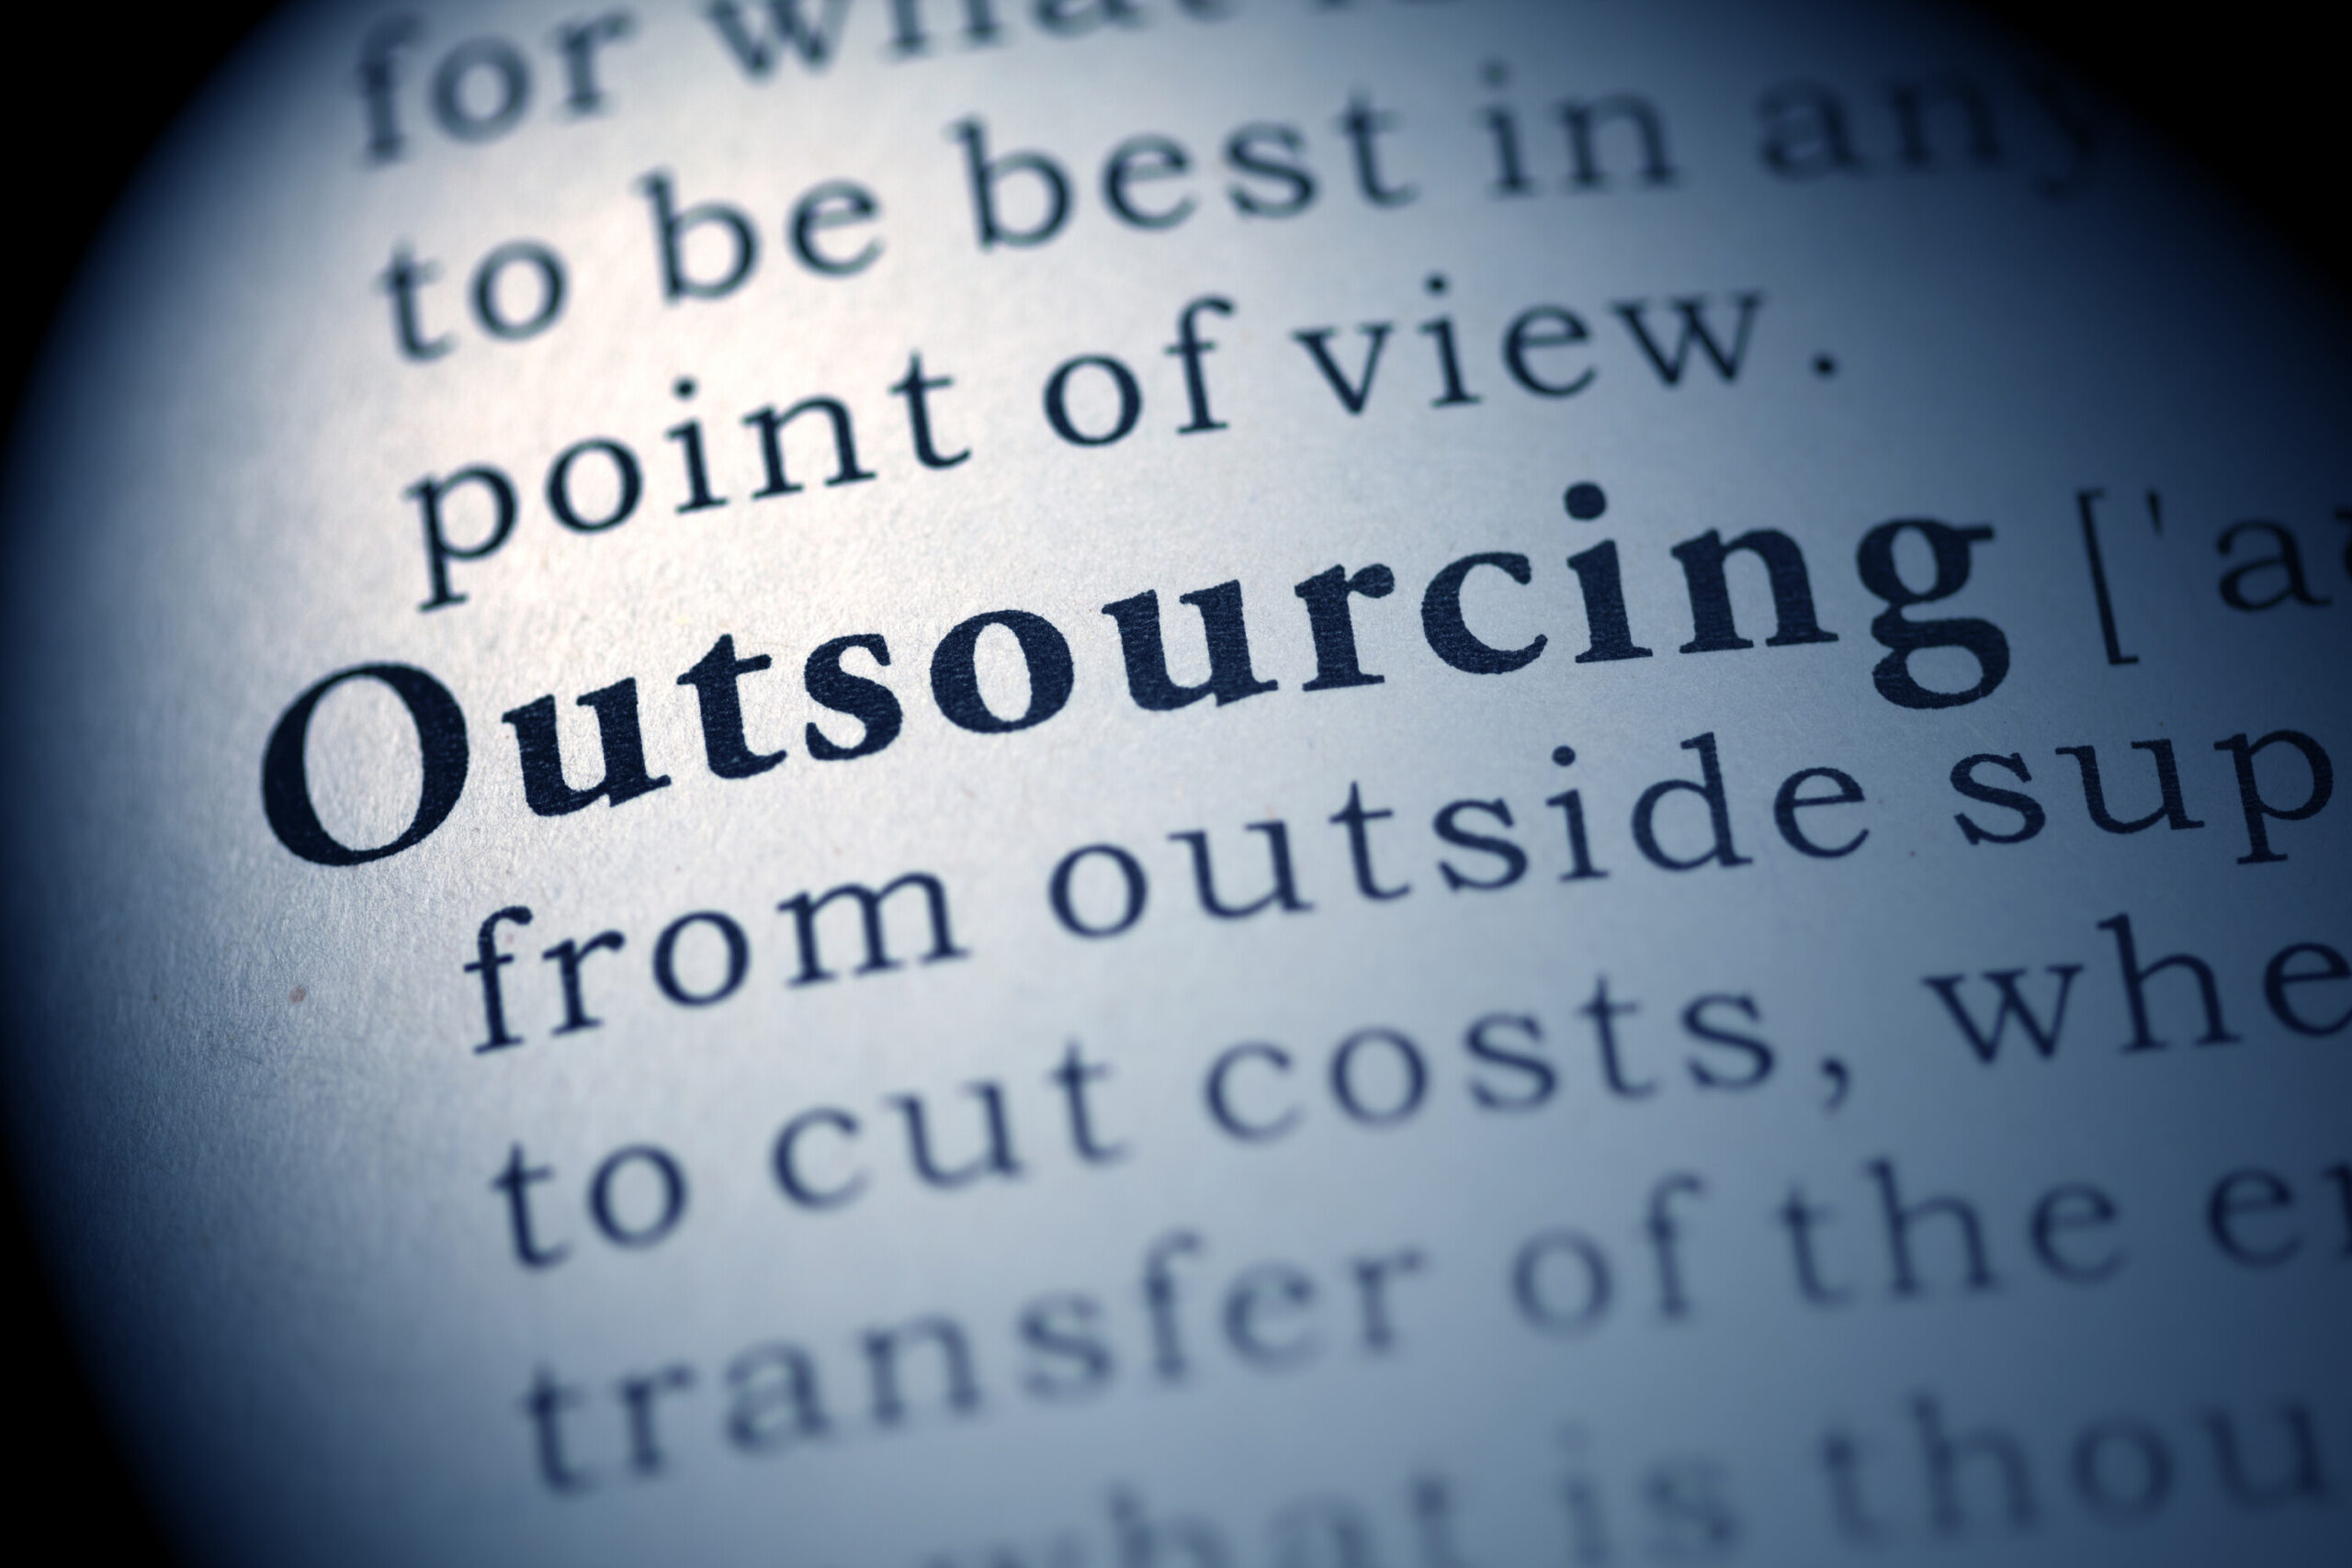 Outsourcing your accounts, the pitfalls and how to avoid them. In this post we examine the risks of outsourcing and potential solutions.